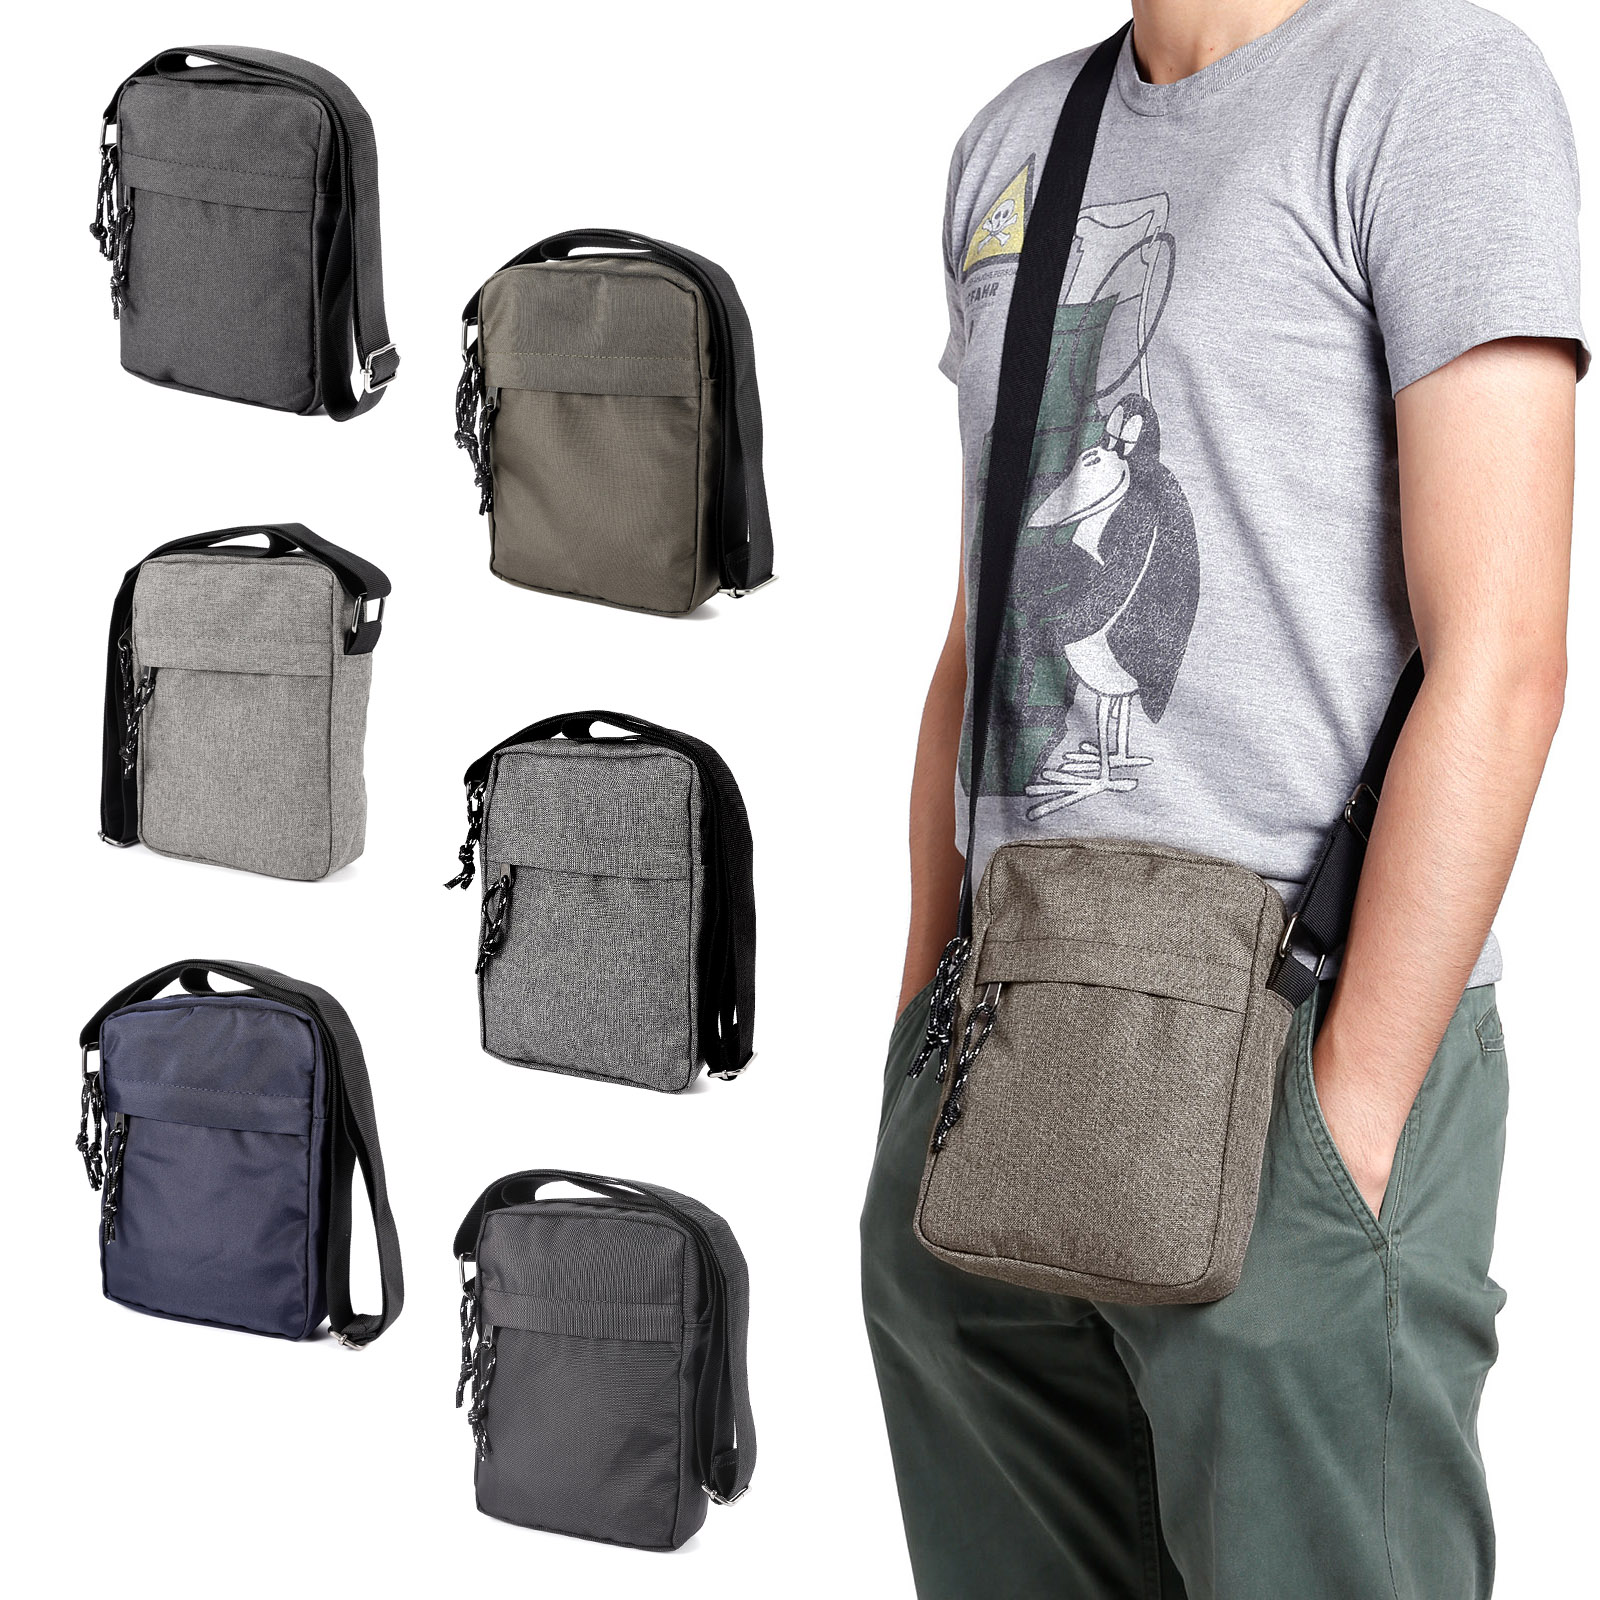 What Are Anti-Robbery Backpacks? How Are They Unique From Common Backpacks?